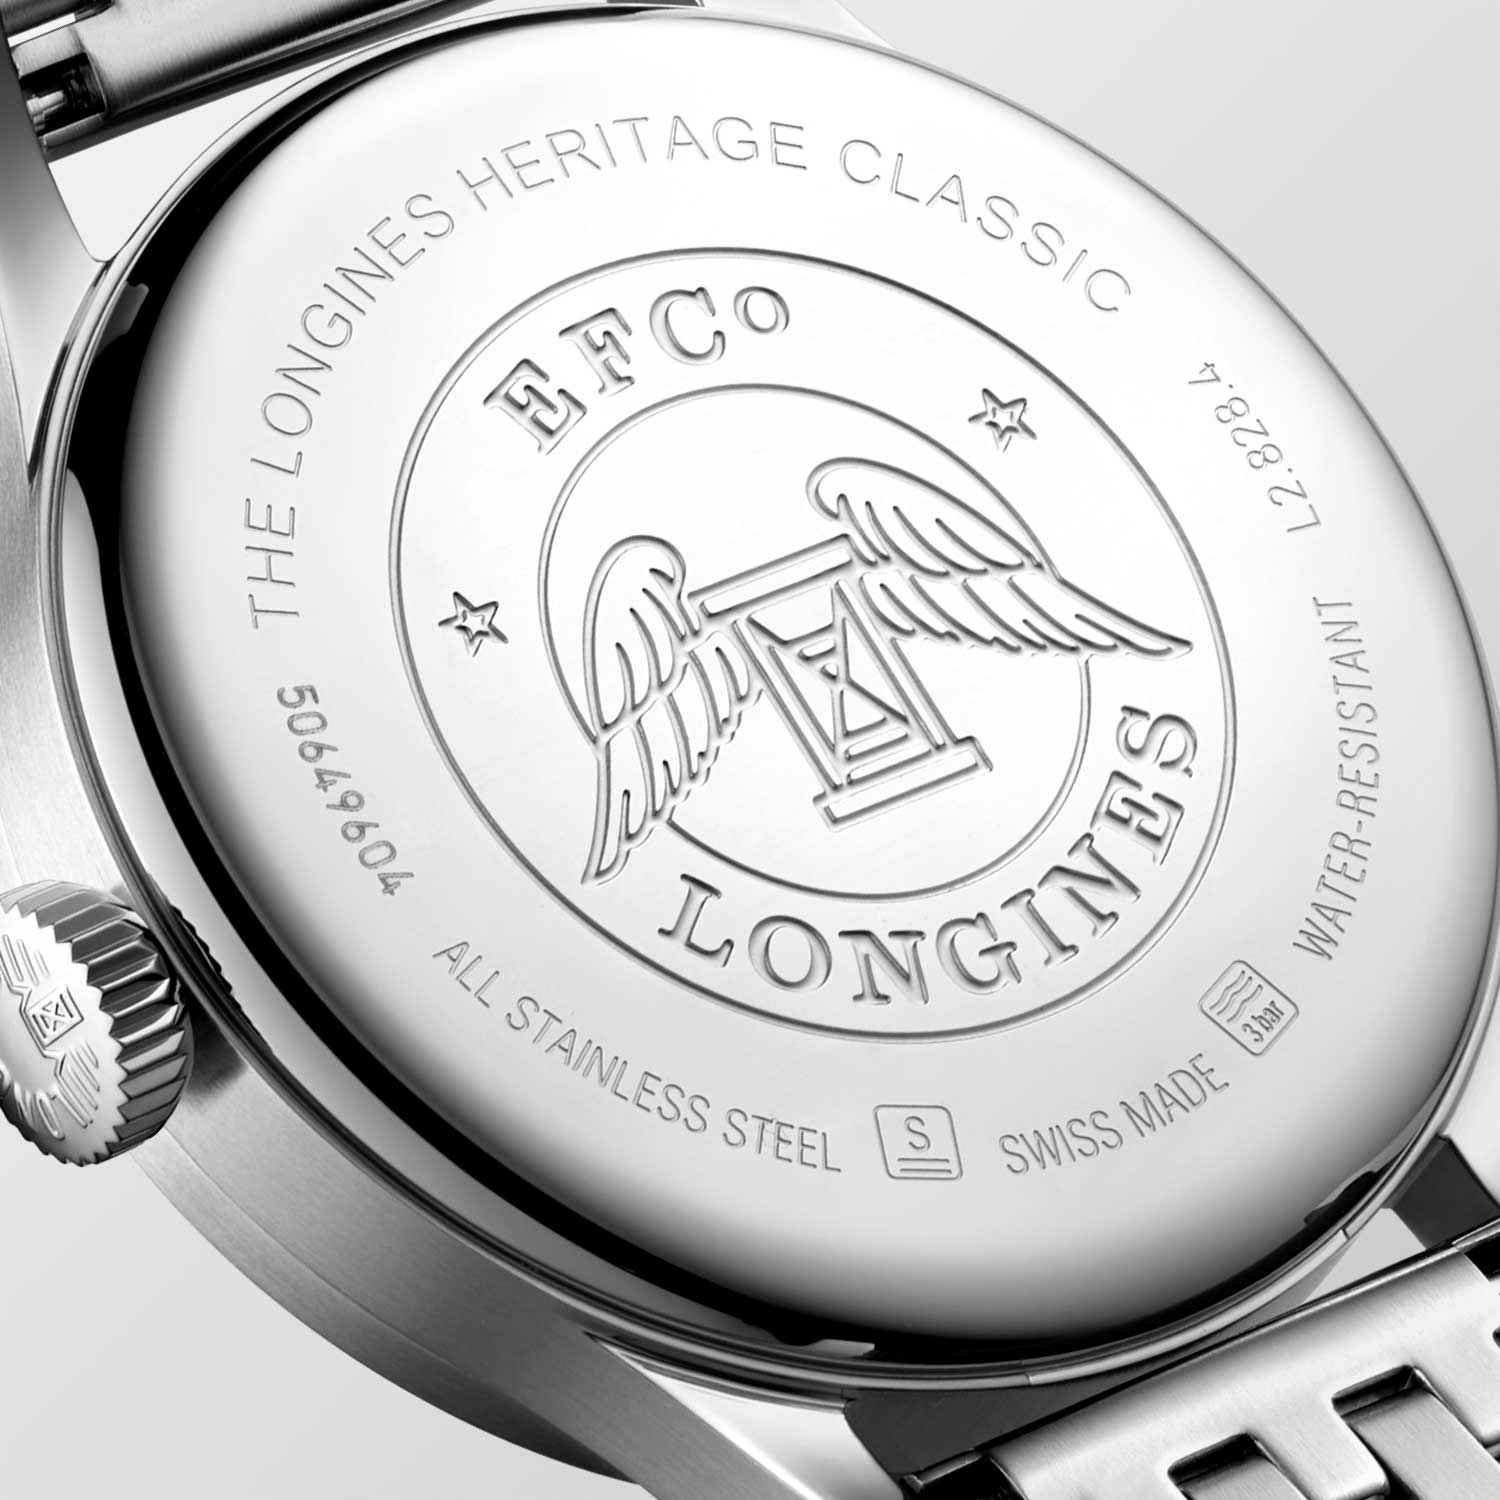 The Heritage Classic is powered by the L893 automatic movement